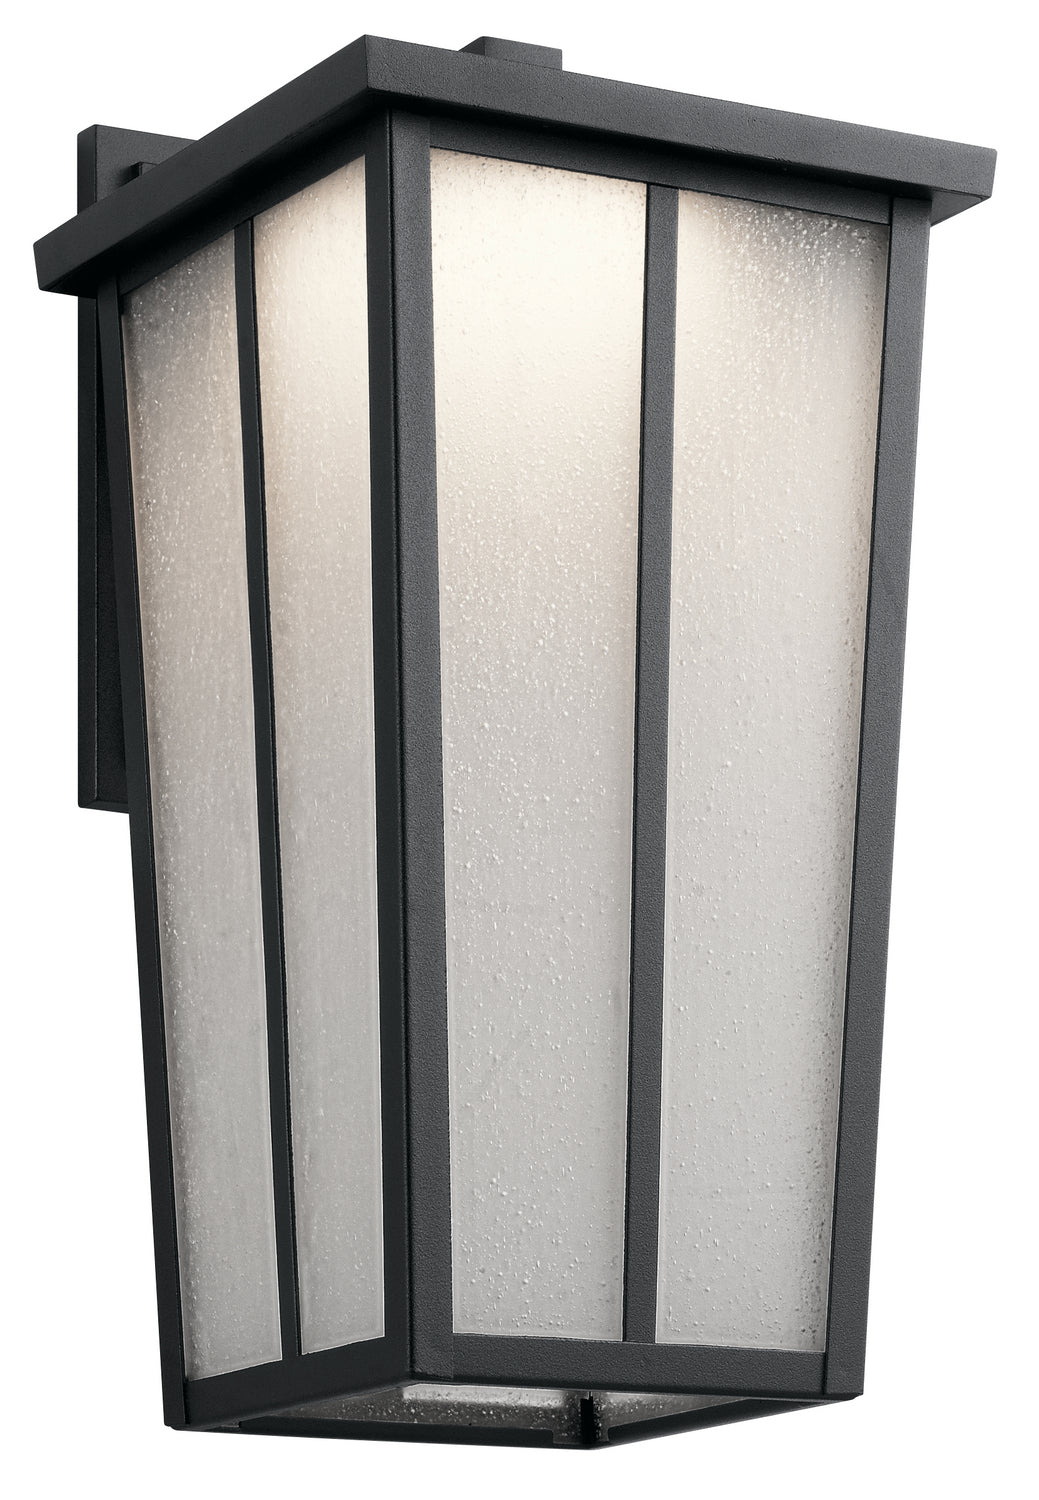 Kichler Canada - LED Outdoor Wall Mount - Amber Valley - Textured Black- Union Lighting Luminaires Decor